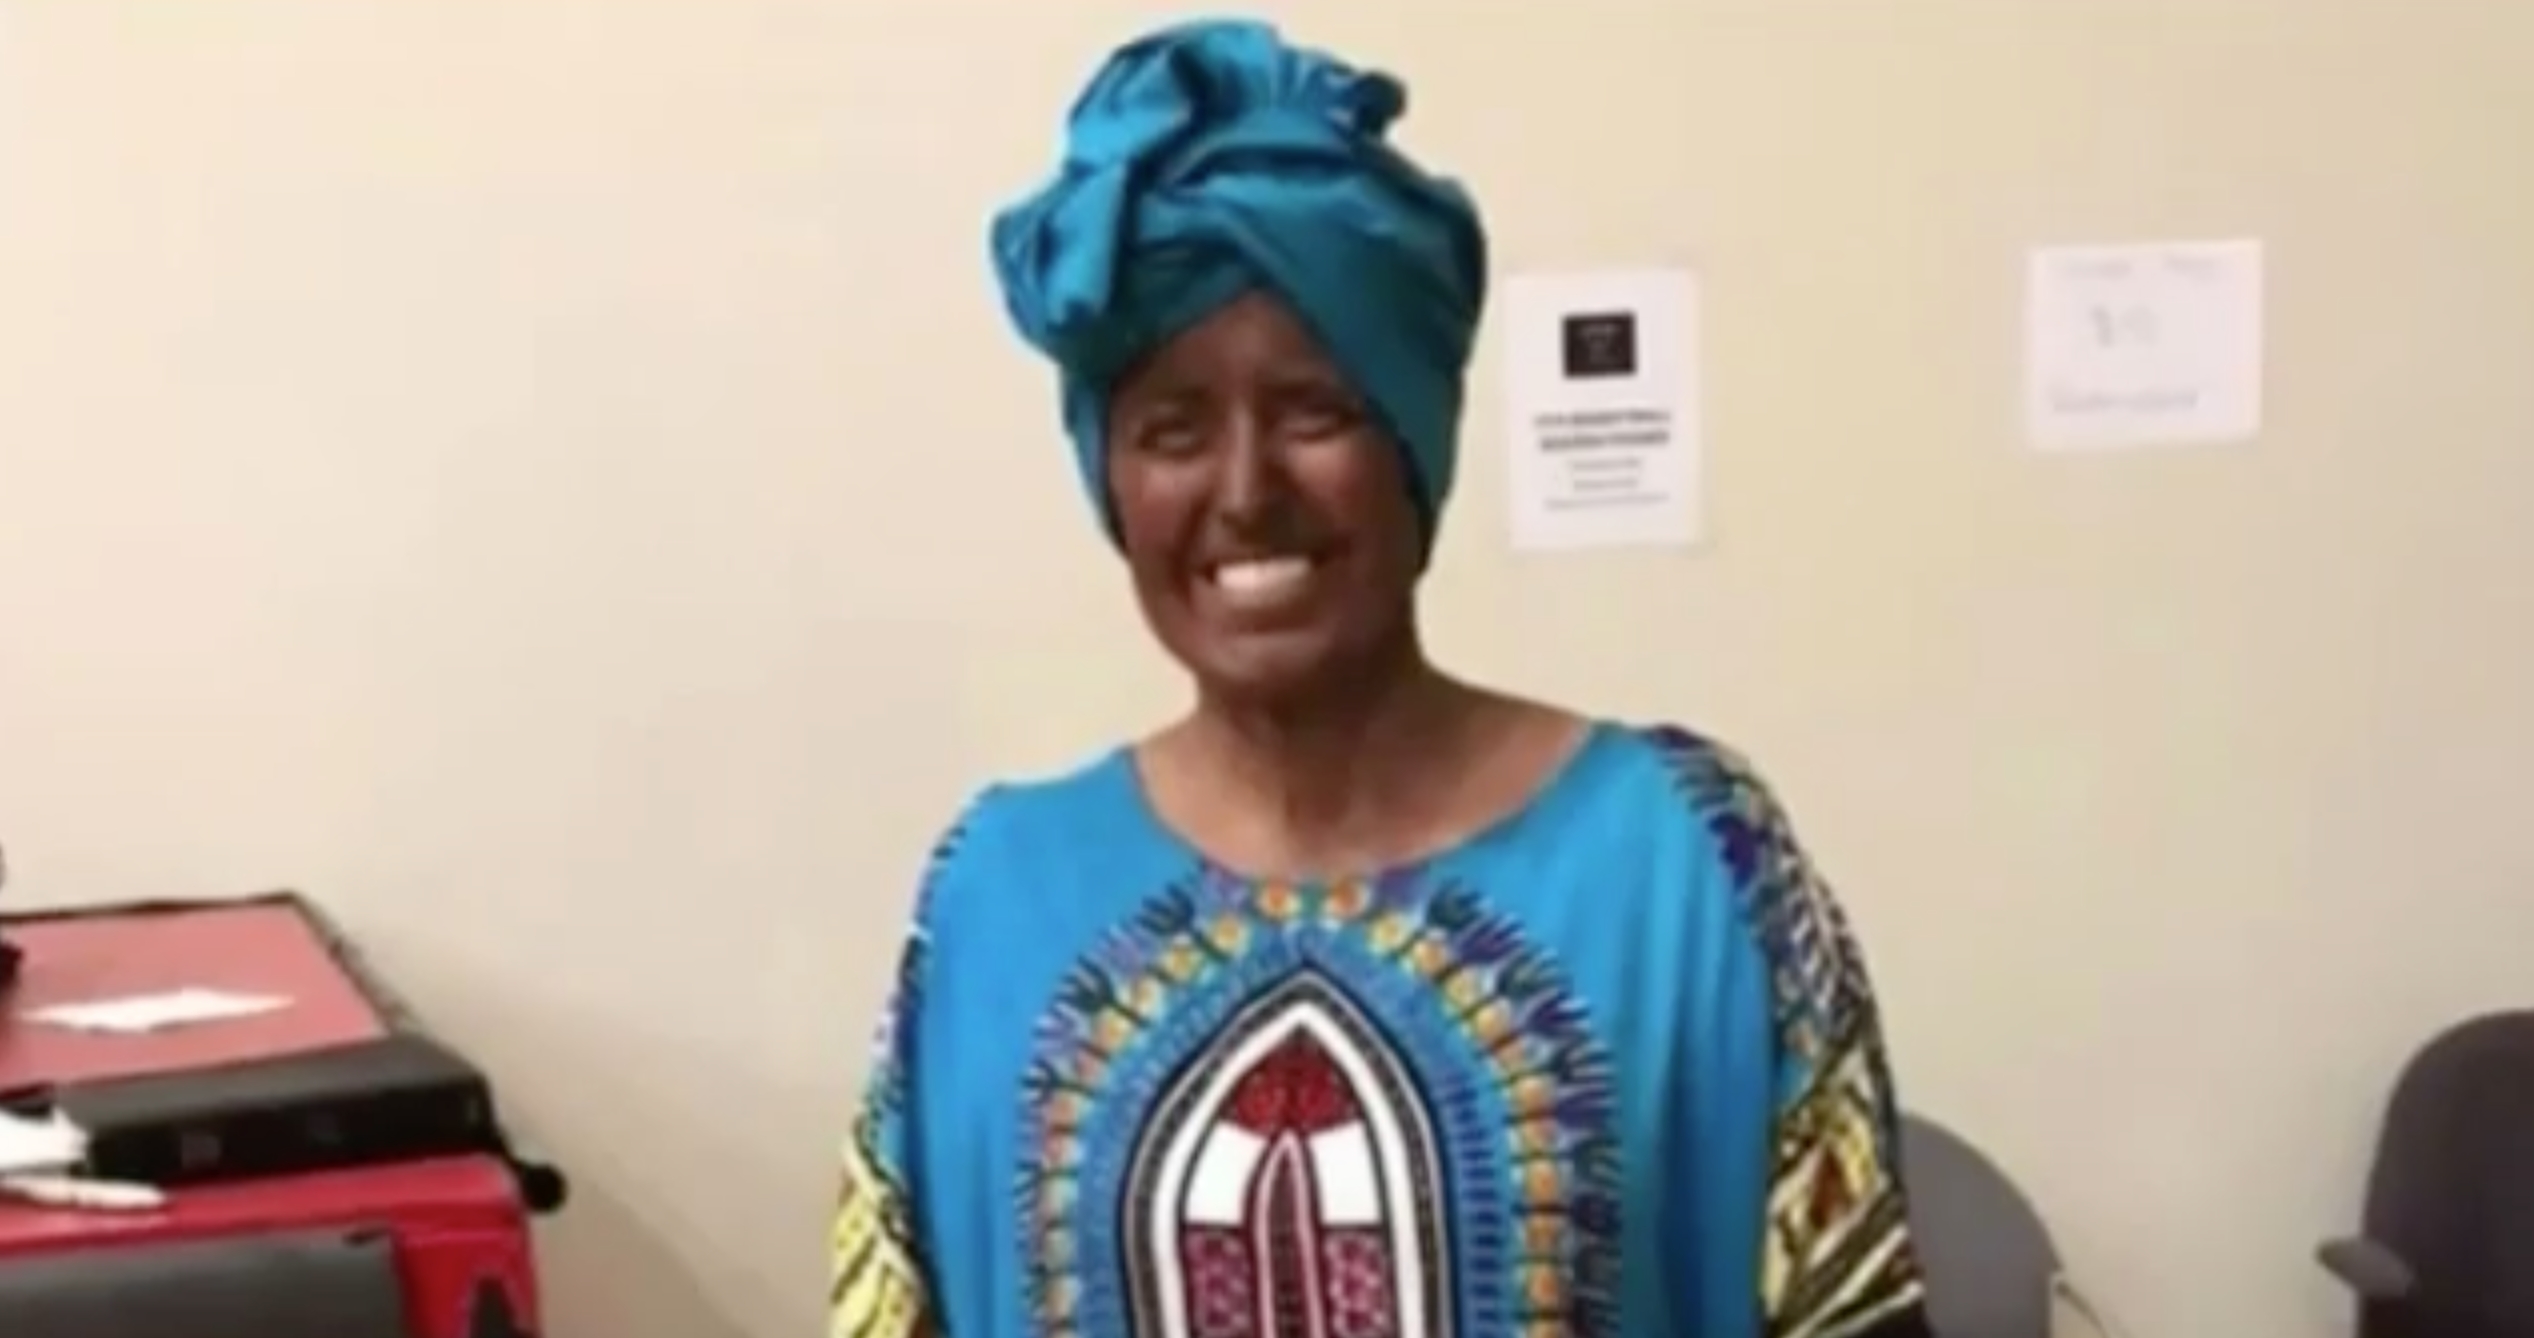 School apologizes after teacher wore blackface for lesson